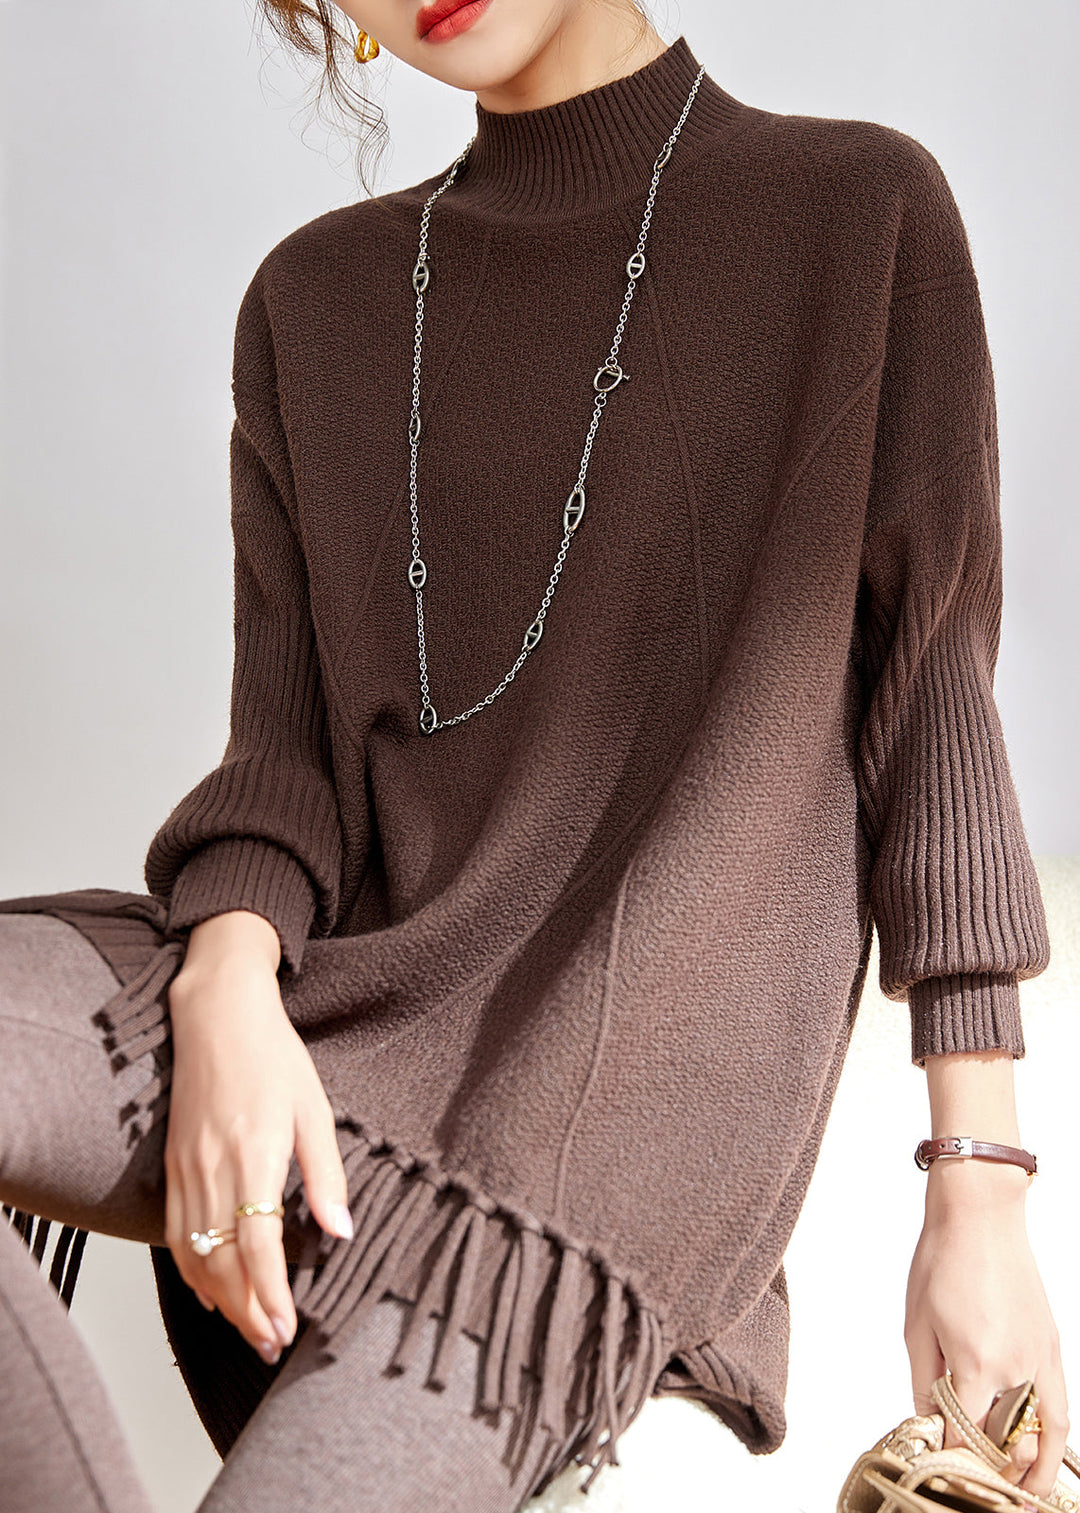 Style Loose Coffee Tasseled Thick Patchwork Knit Sweaters Winter